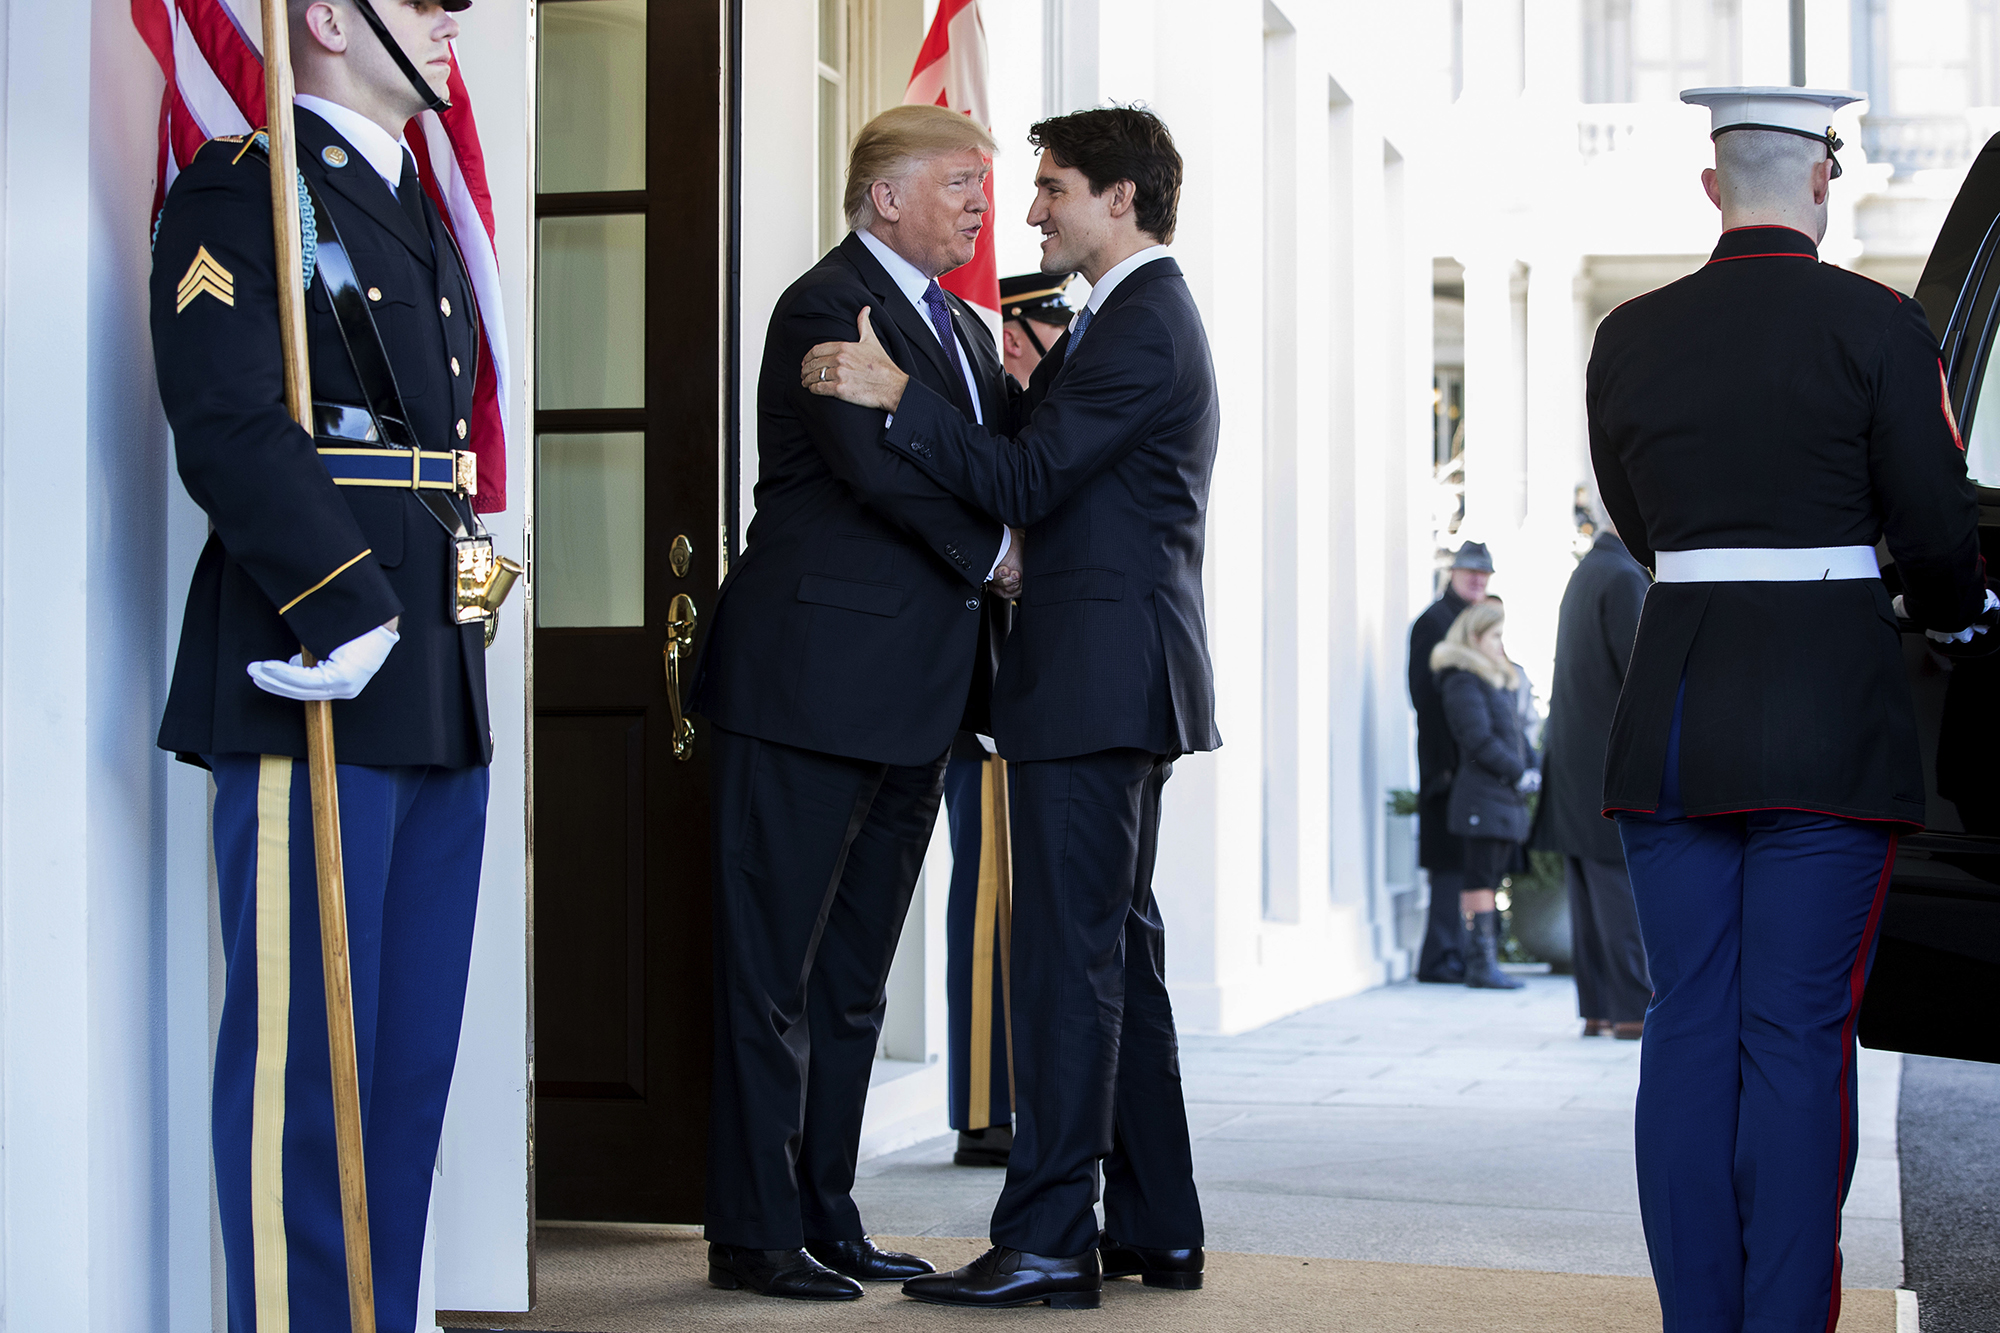 President Donald Trump welcomes Canadian Prime Minister Justin Trudeau outside the West Wing of the White House in Washington, Monday, Feb. 13, 2017. (AP Photo/Andrew Harnik)